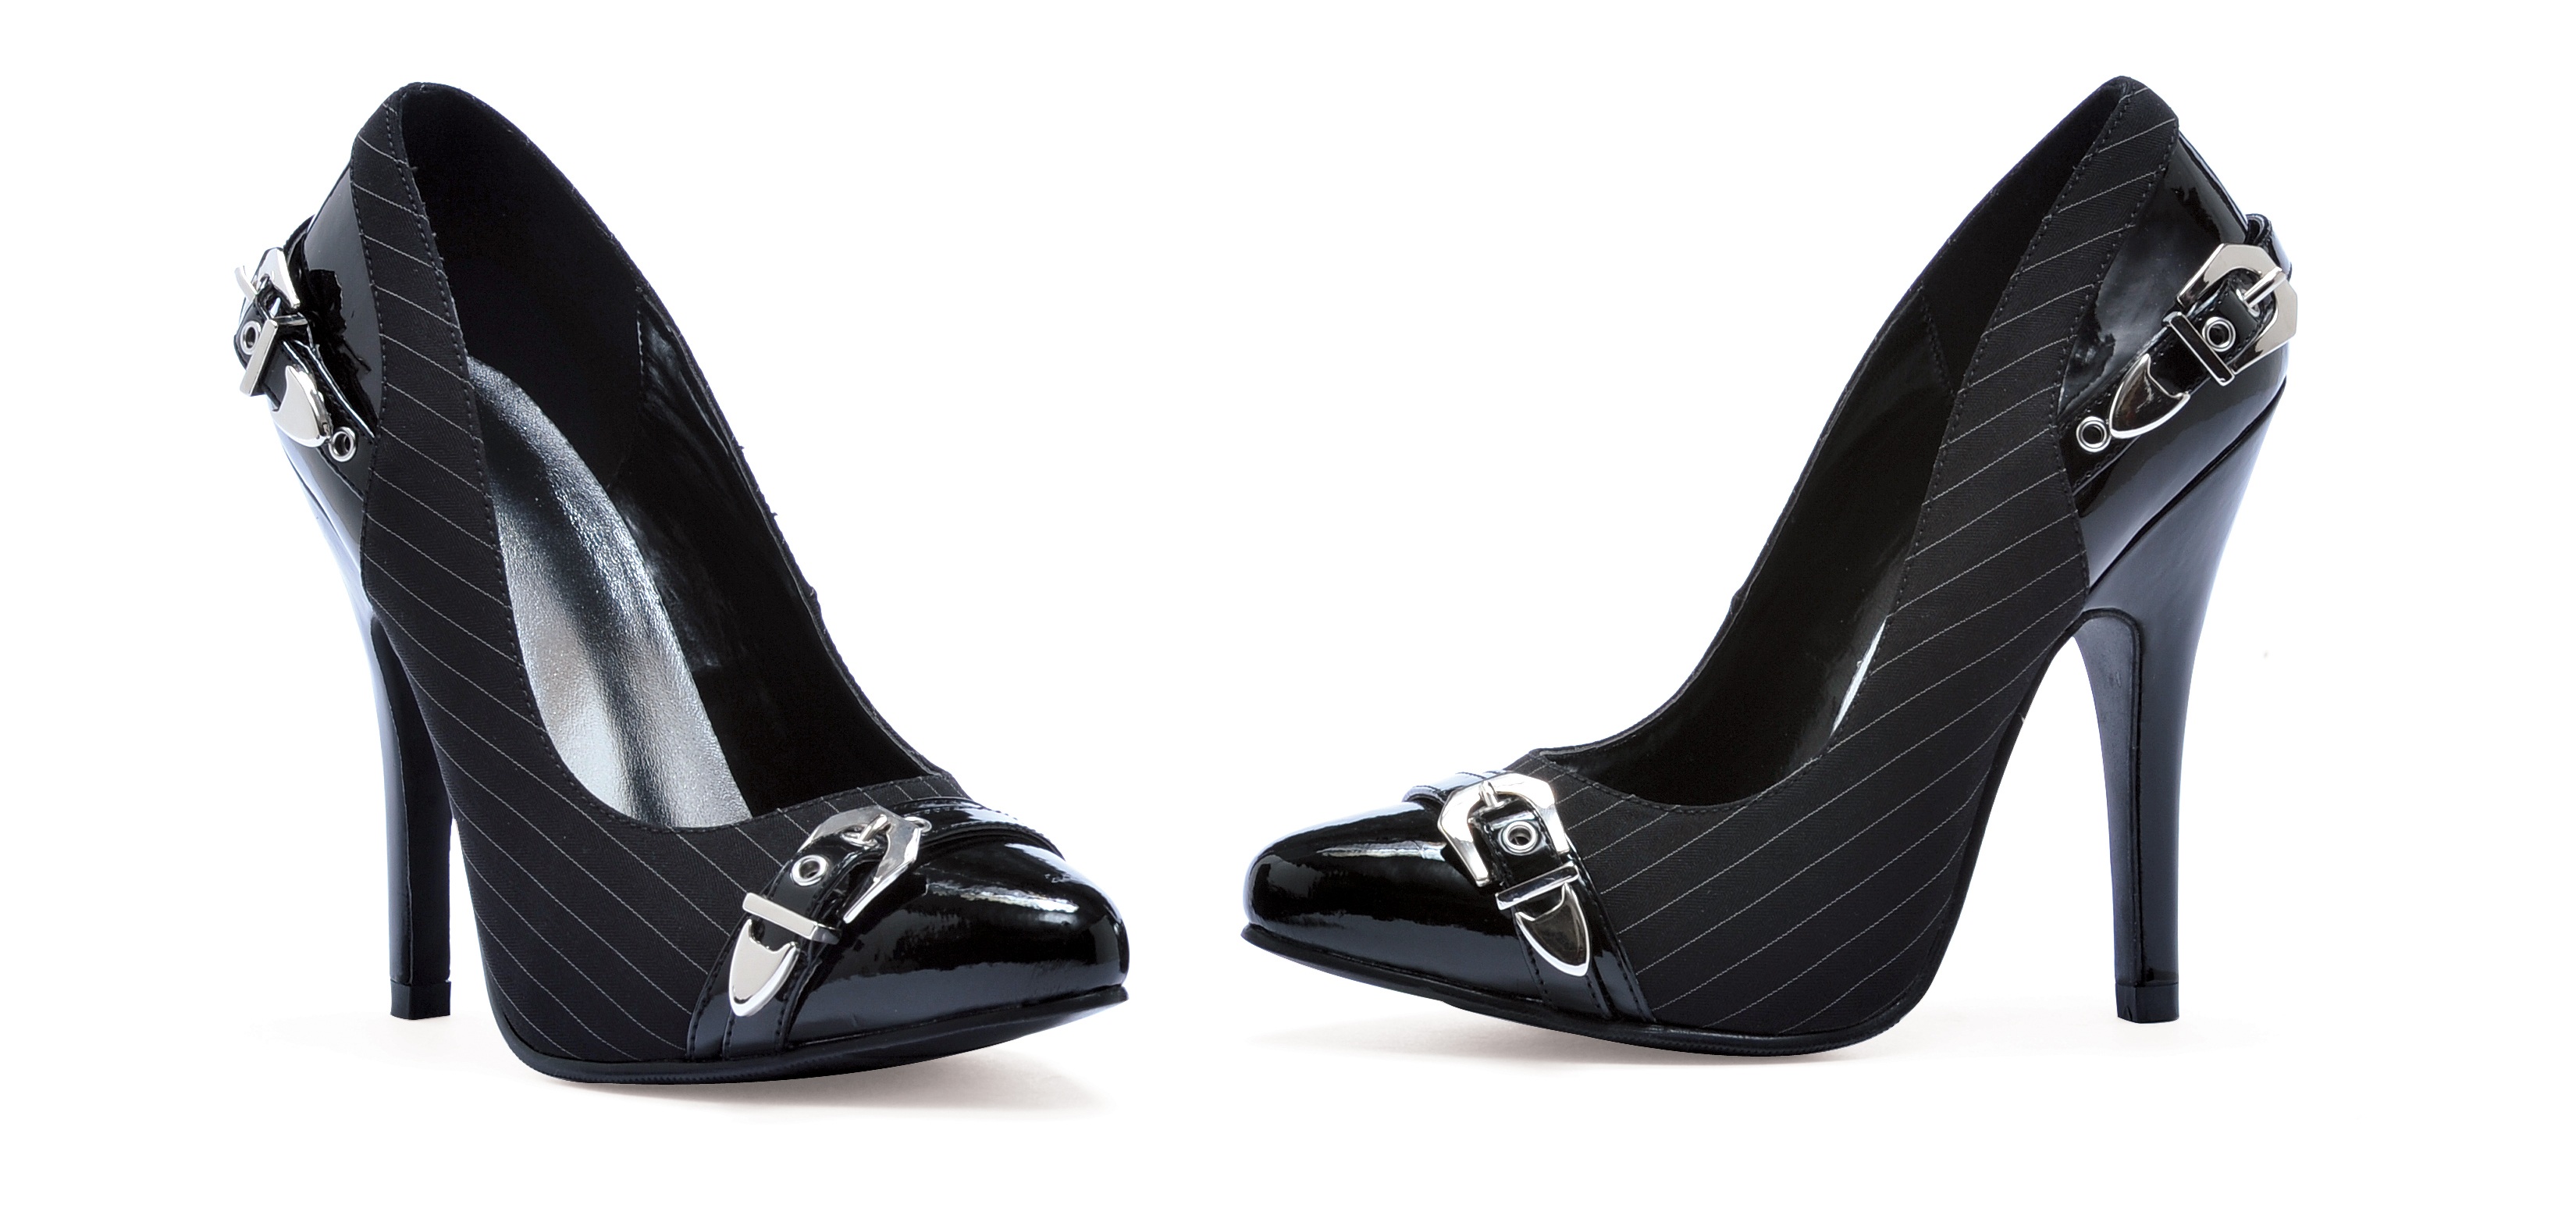 Shane - 5 Inch Tuxedo Pump with Buckle Accents